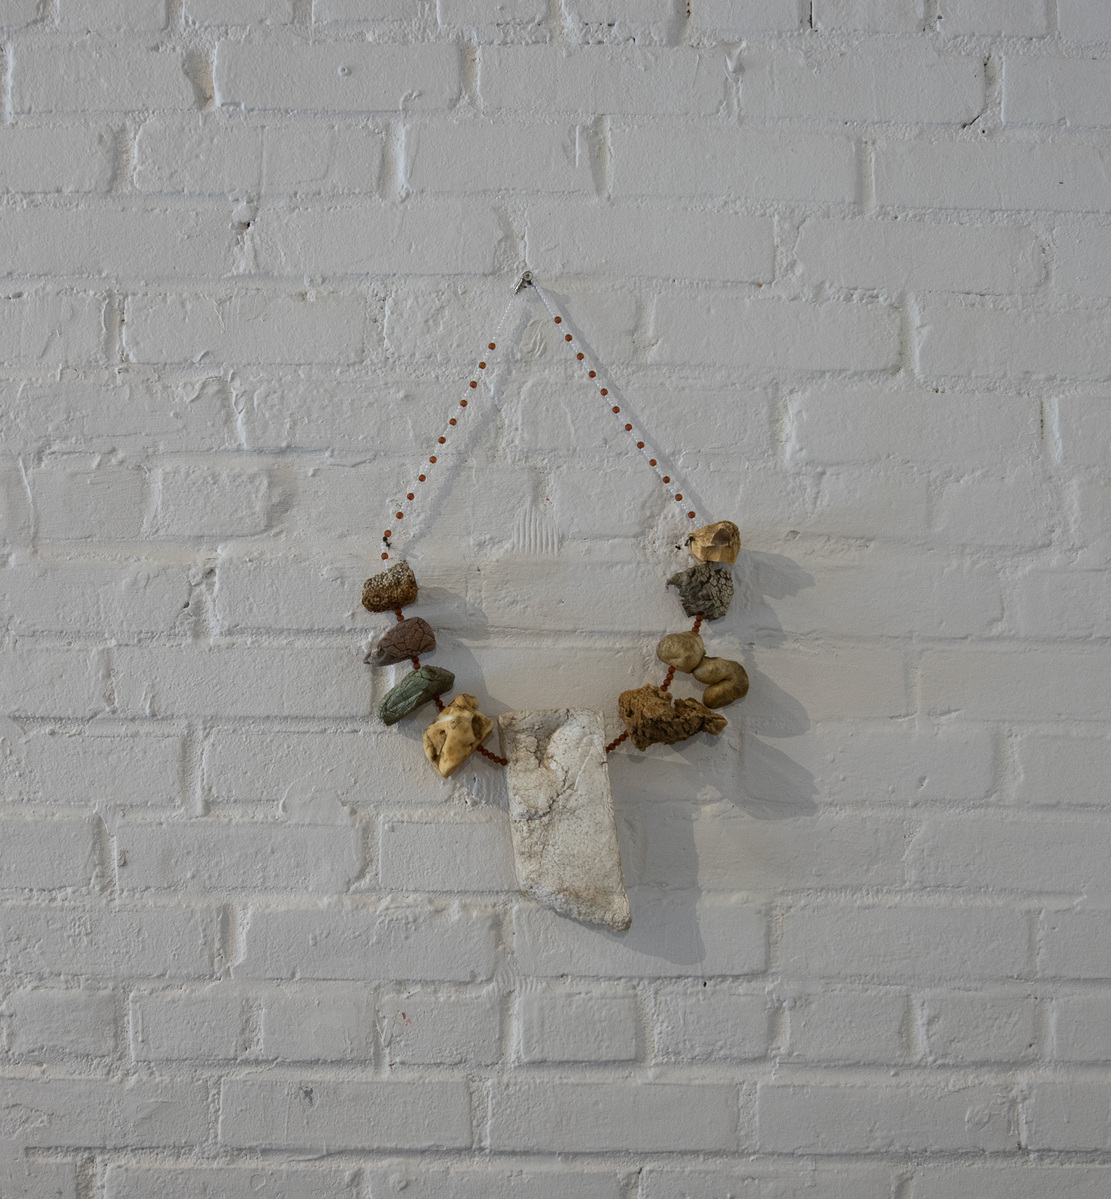 Works from Priscilla Stadler's art project SLUDGE created in response to  toxic Newtown Creek,  NYC, include pieces made with debris found at the Creek. This necklace is made from weathered styrofoam, some of which looks like stones, and beads.